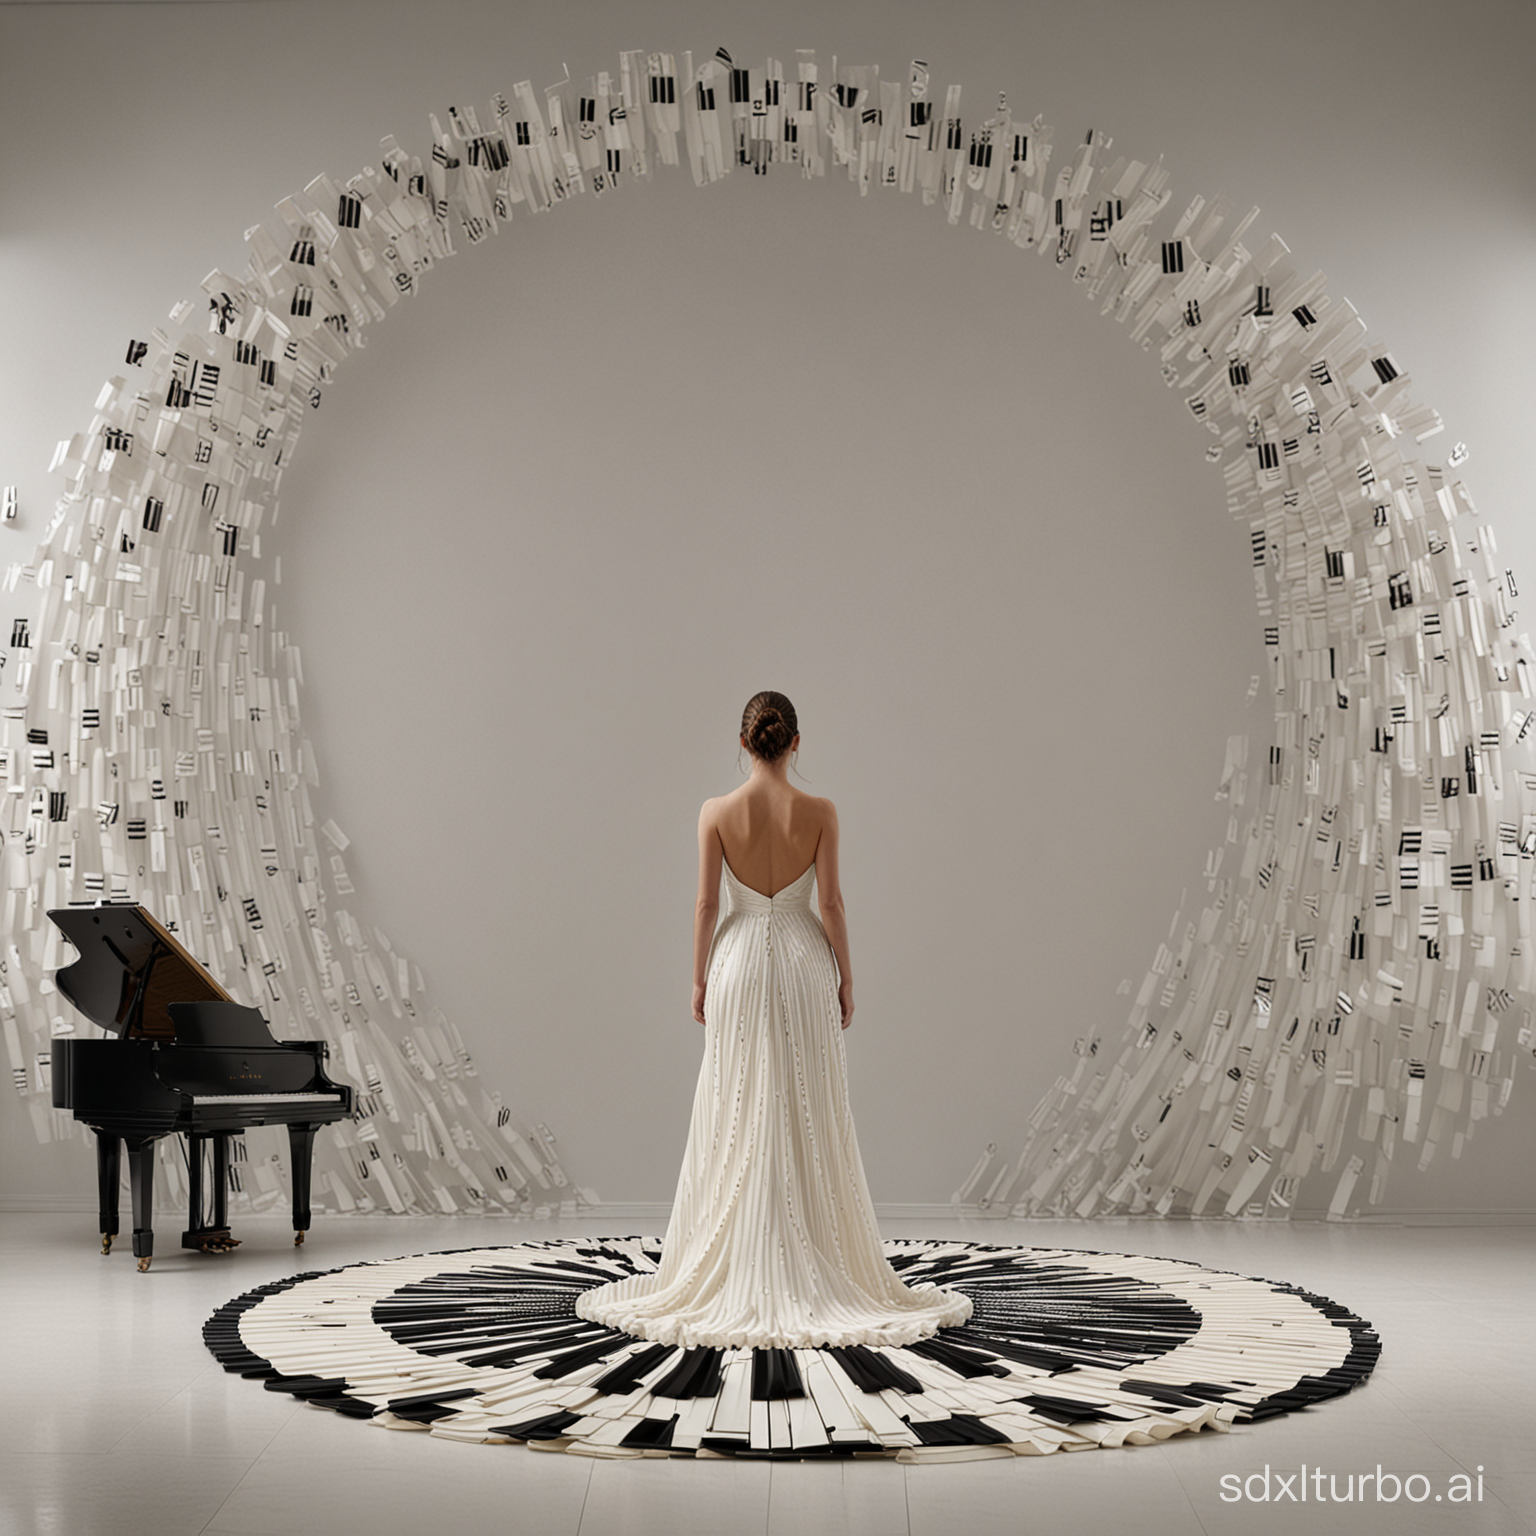 Hyper realistic high definition photography of a women standing sideways, her gown light cream white and black, her gowns trail fanned out behind her in a huge semi circle shape, denotes the keys of a Piano, the design is like piano keys, behind her bursts out notations in black colour, bursting out into the white wall behind her. UHD 64K resolution.